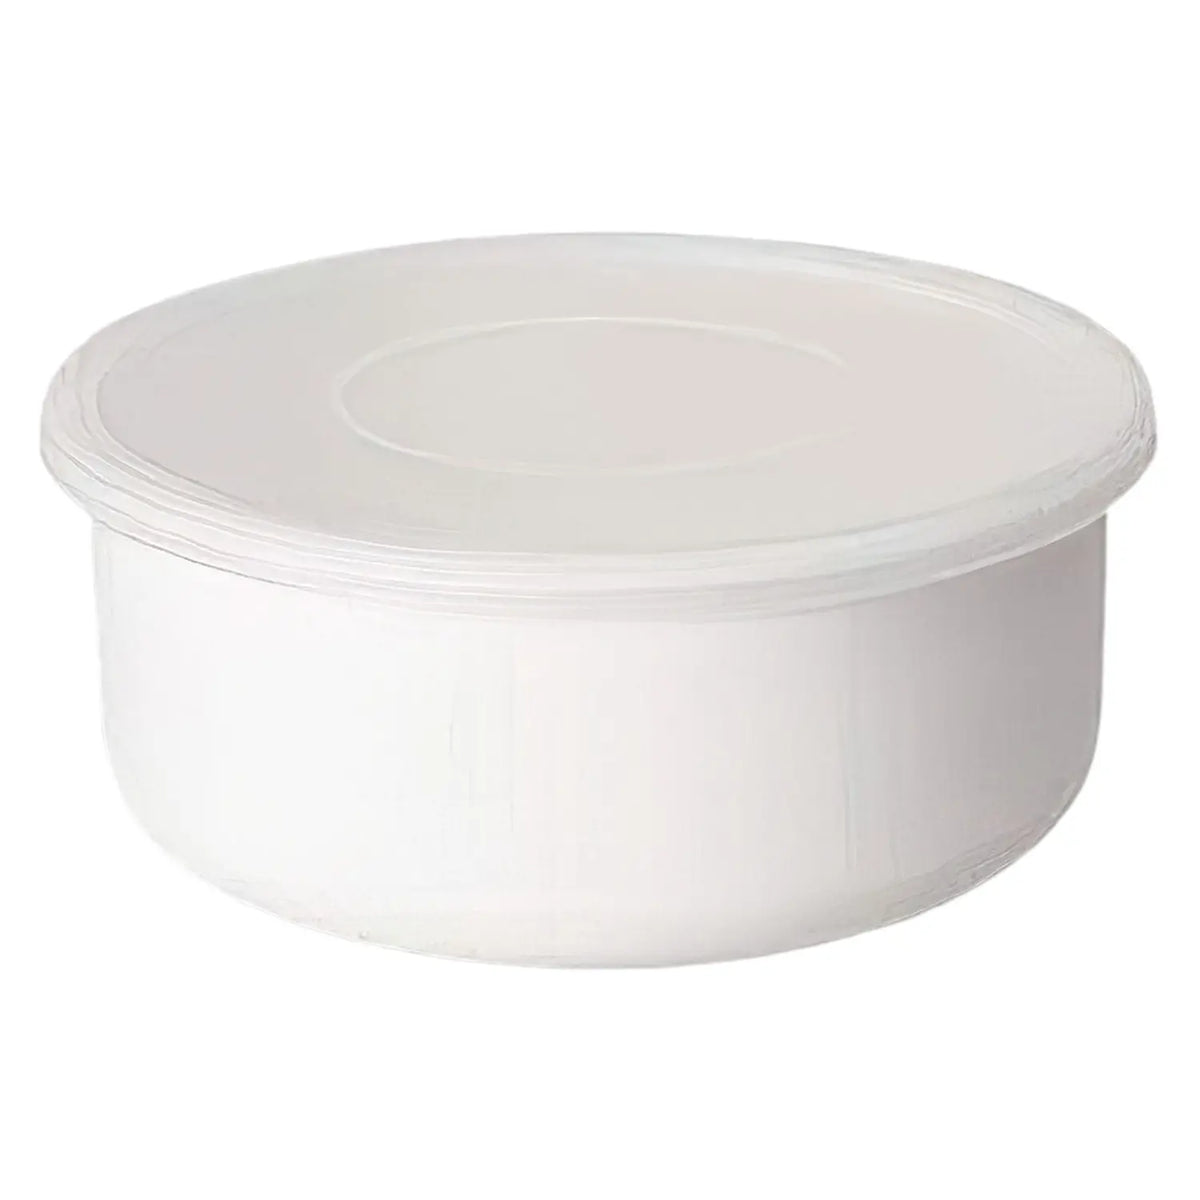 Noda Horo White Series Enamel Round Food Containers with Lid